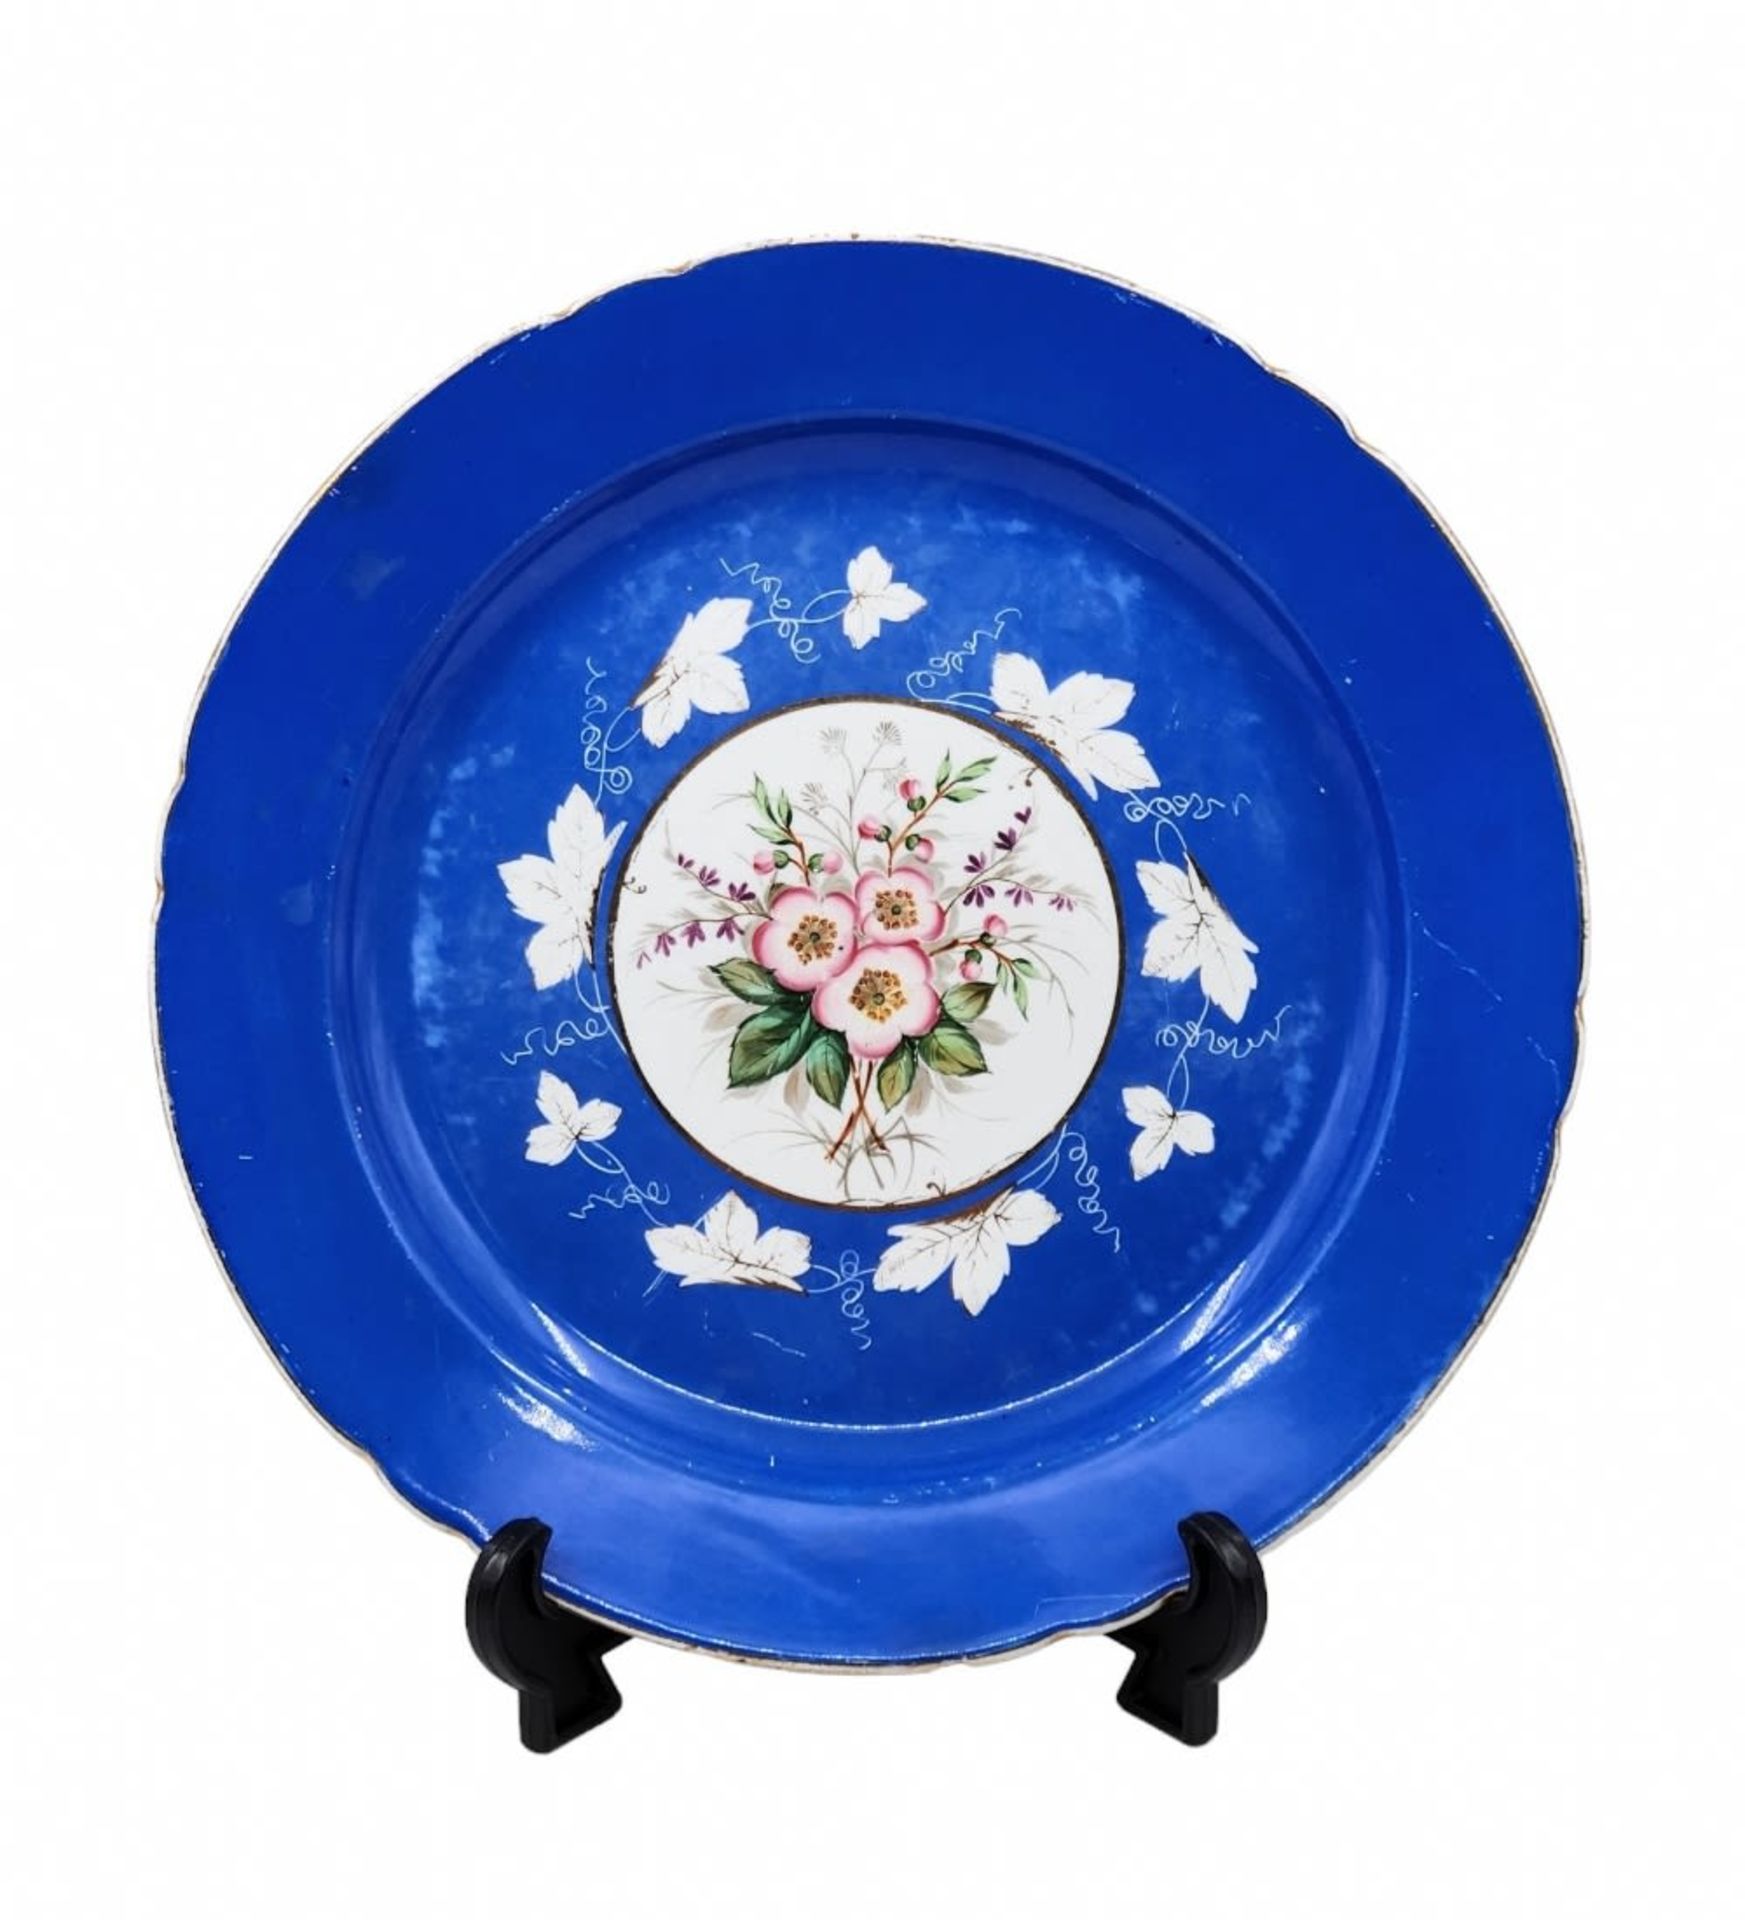 Bukhari porcelain plate, decorated with a floral hand drawing in polychrome enamel, signed.